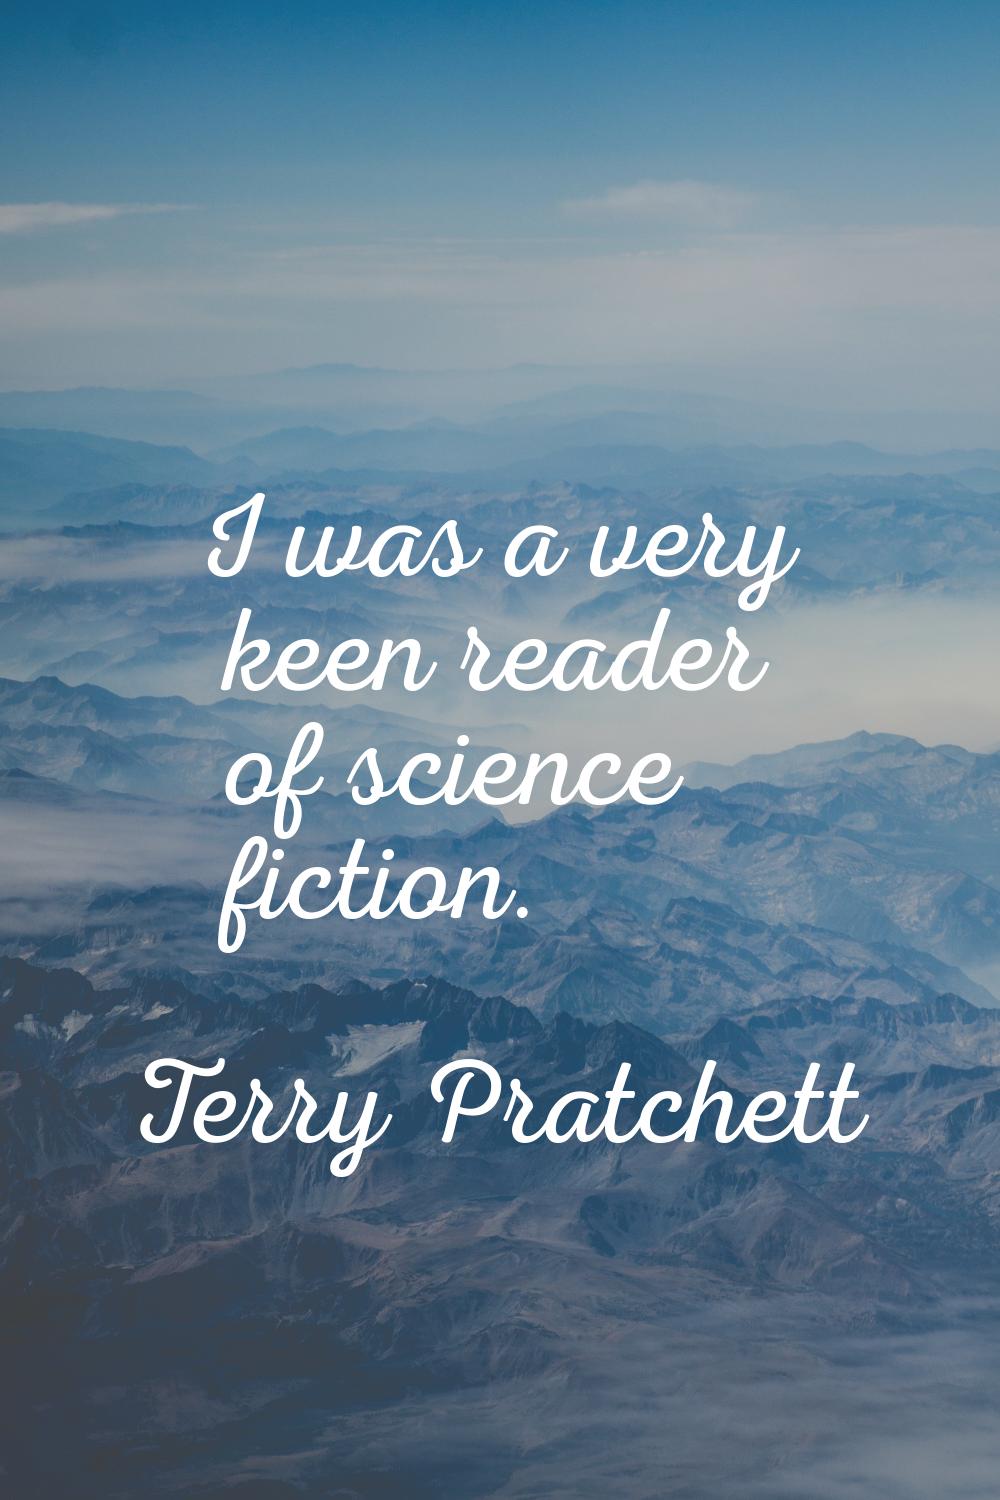 I was a very keen reader of science fiction.